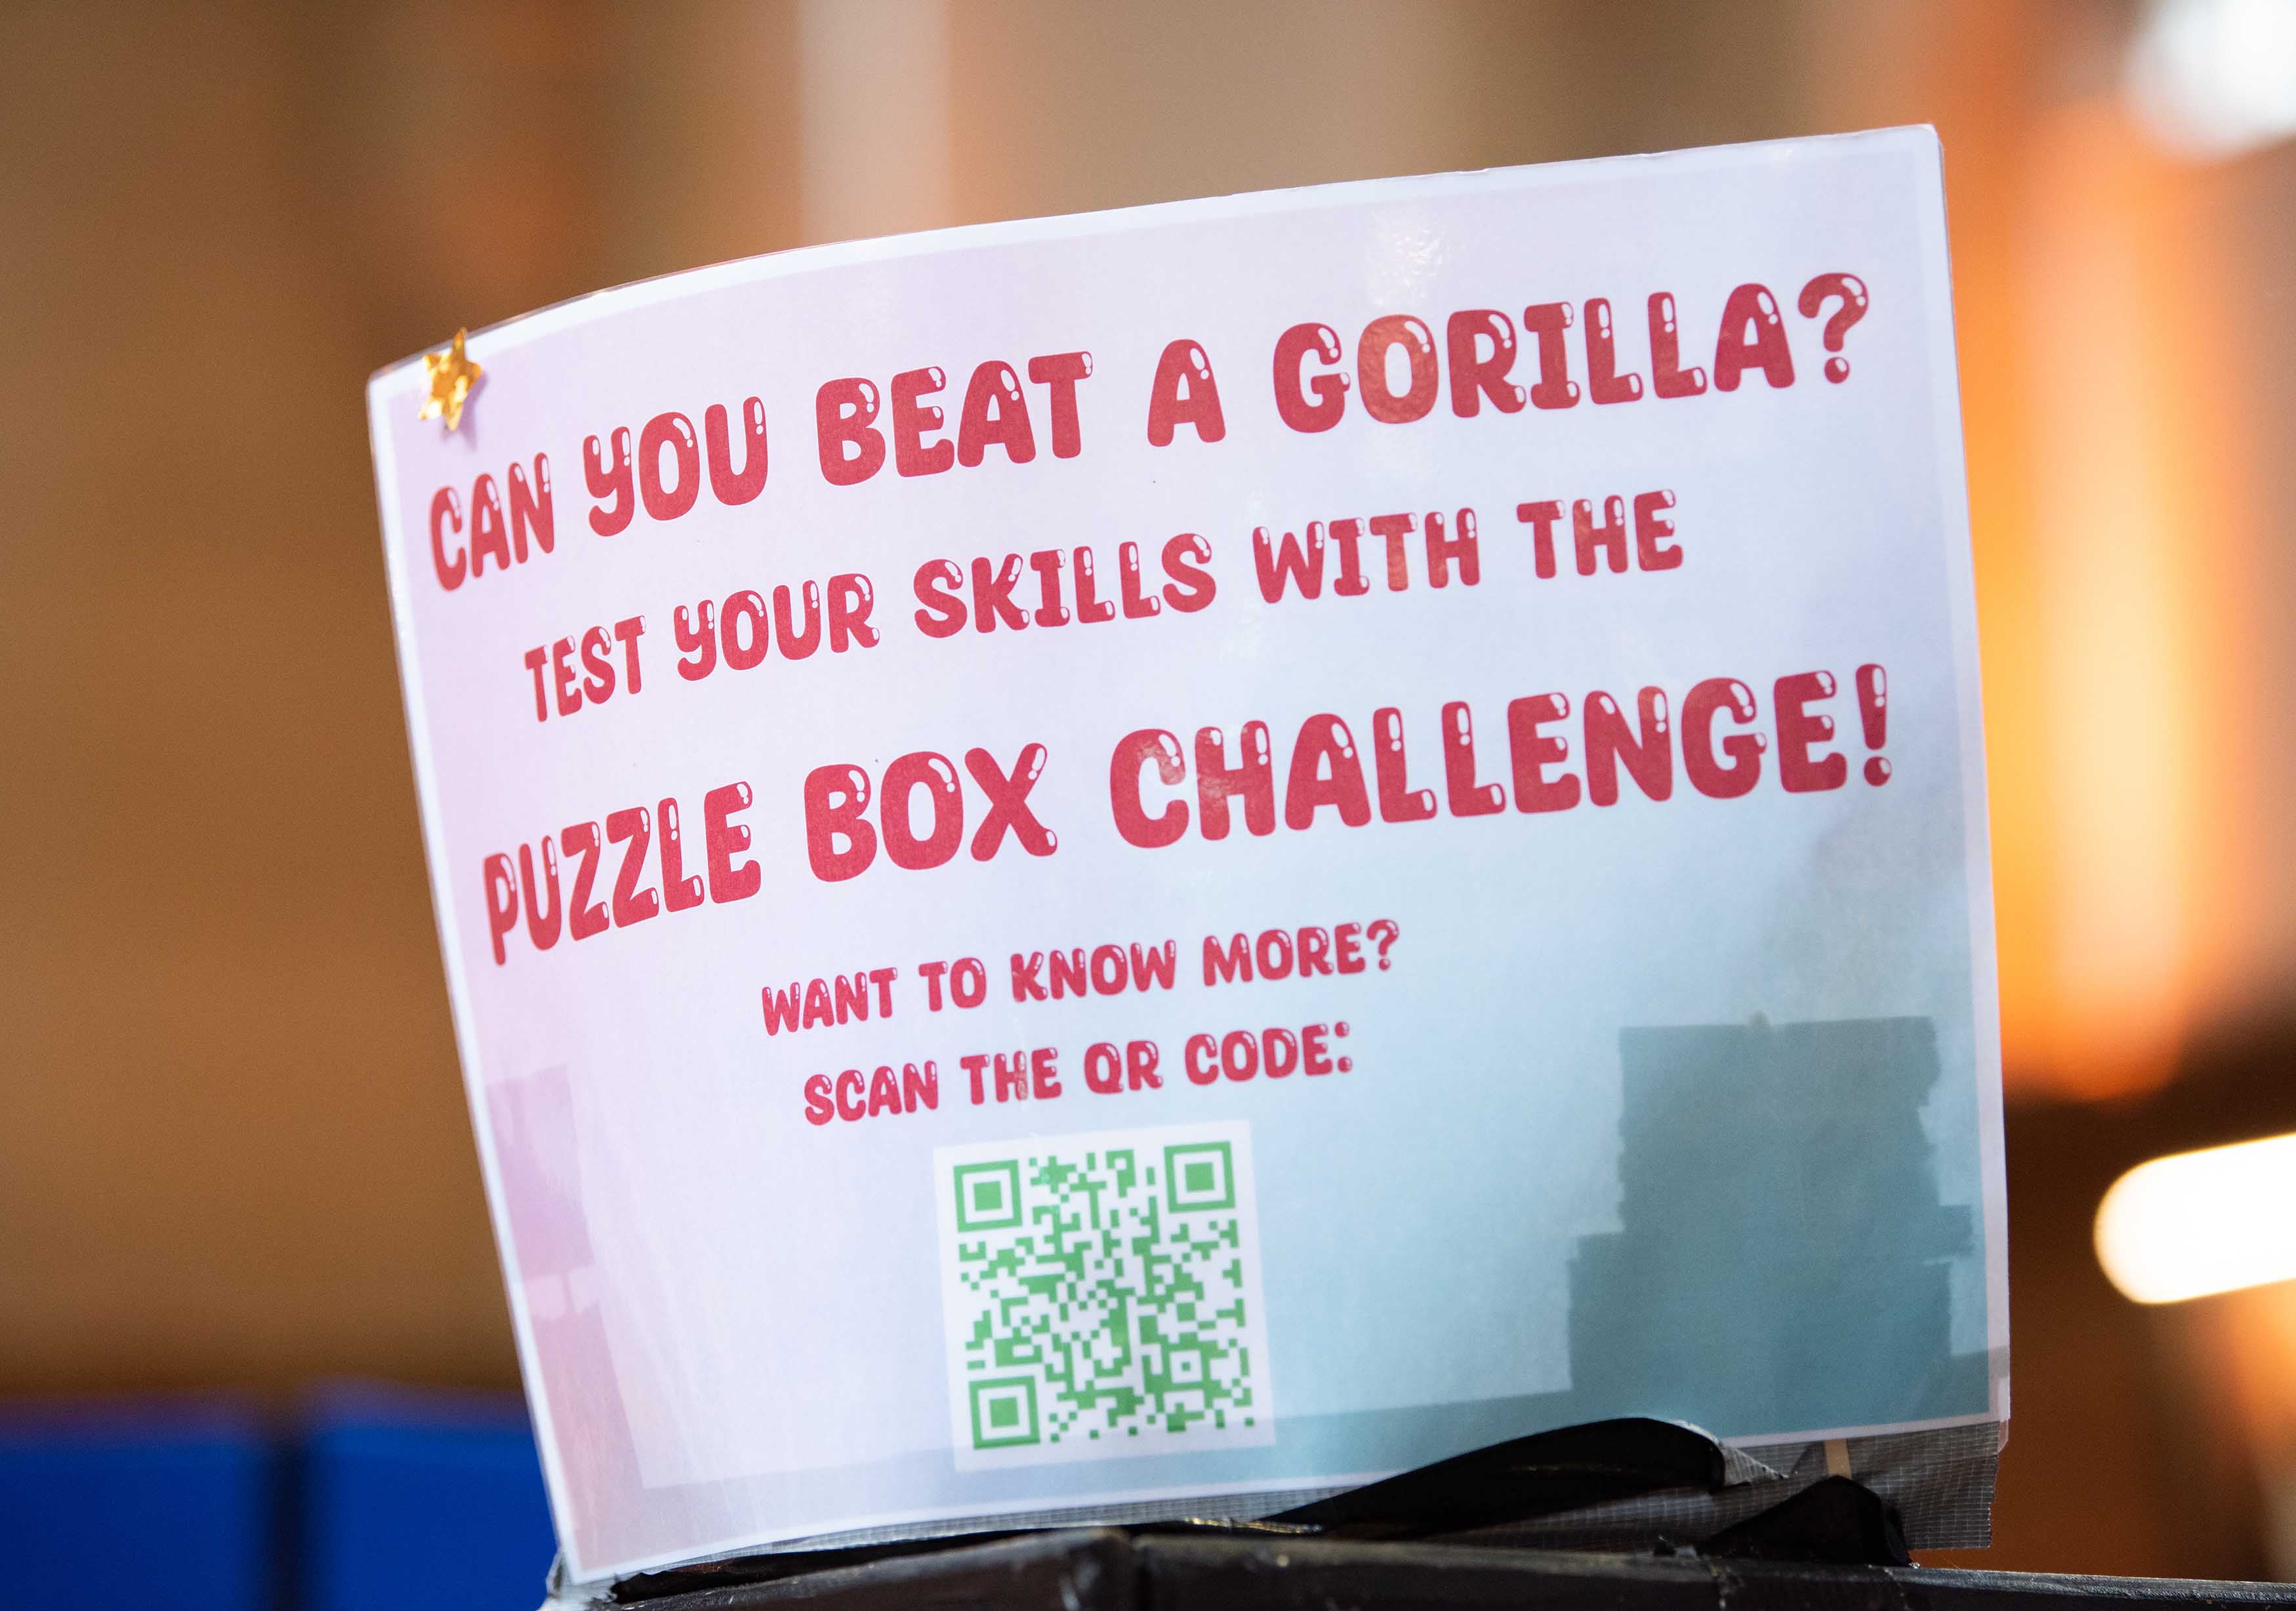 Can you beat a gorilla? puzzle box